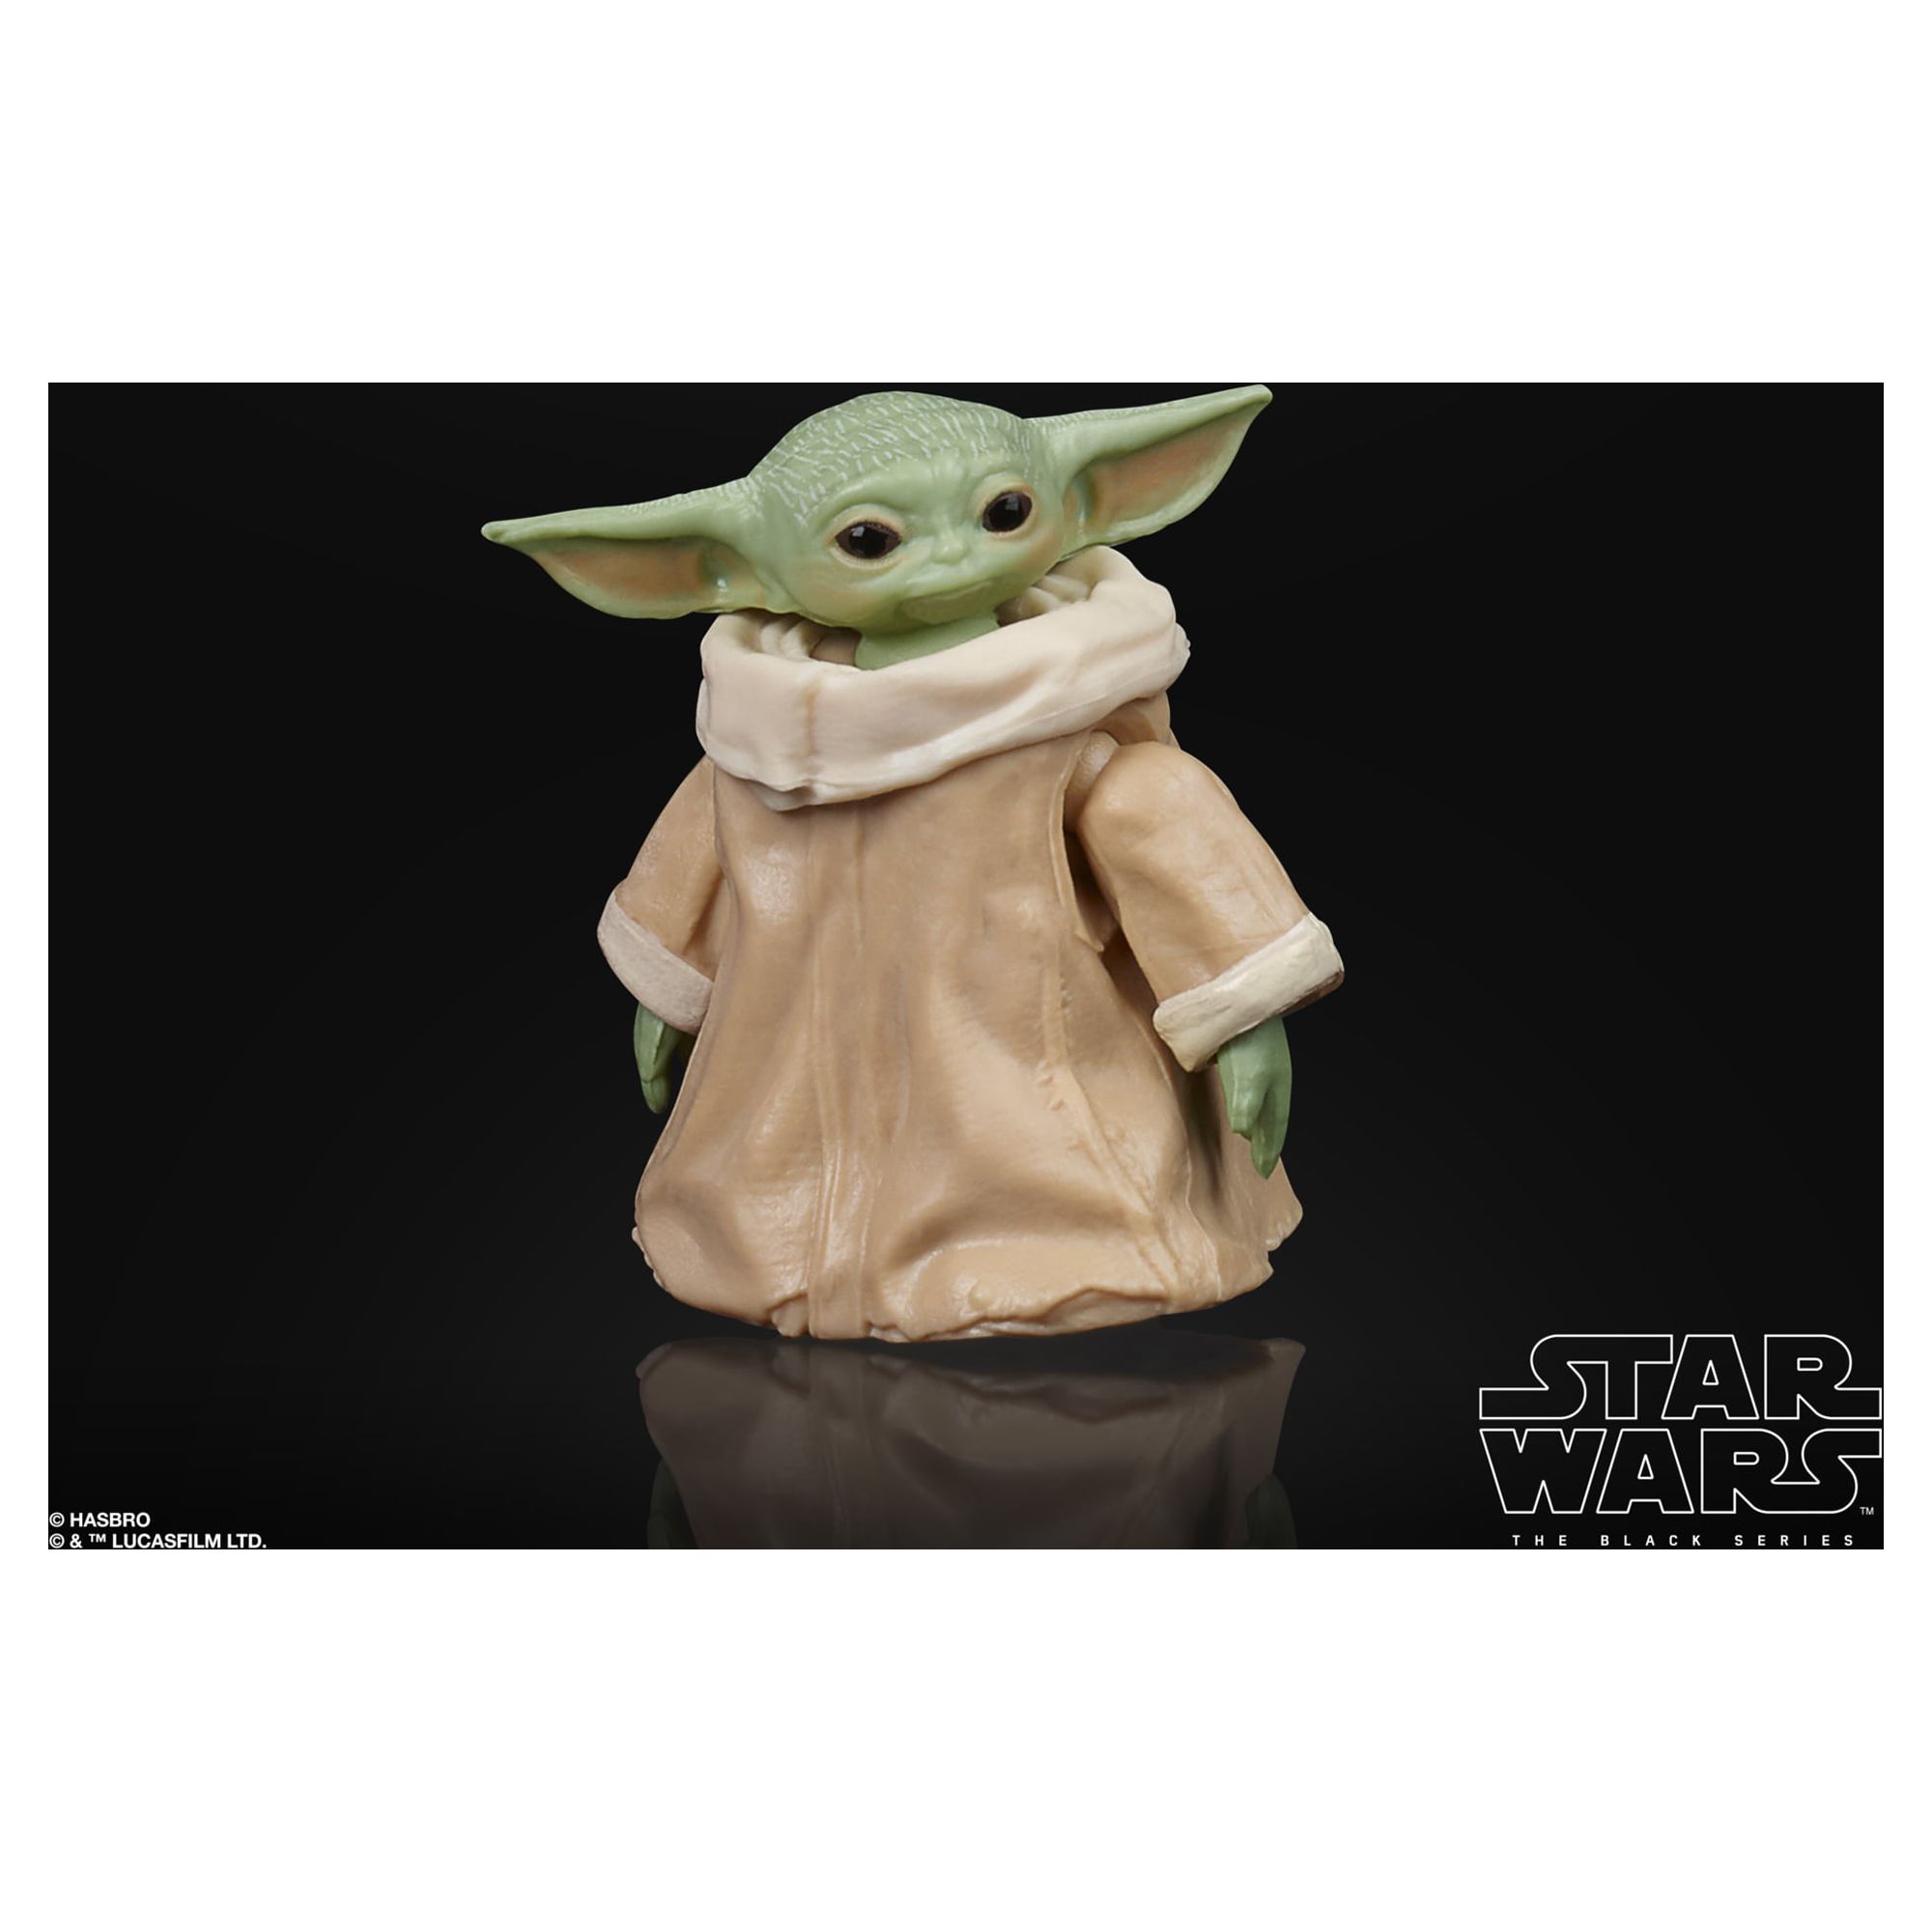 Star Wars The Black Series The Child Toy Action Figure (1.1 inches) - image 3 of 6